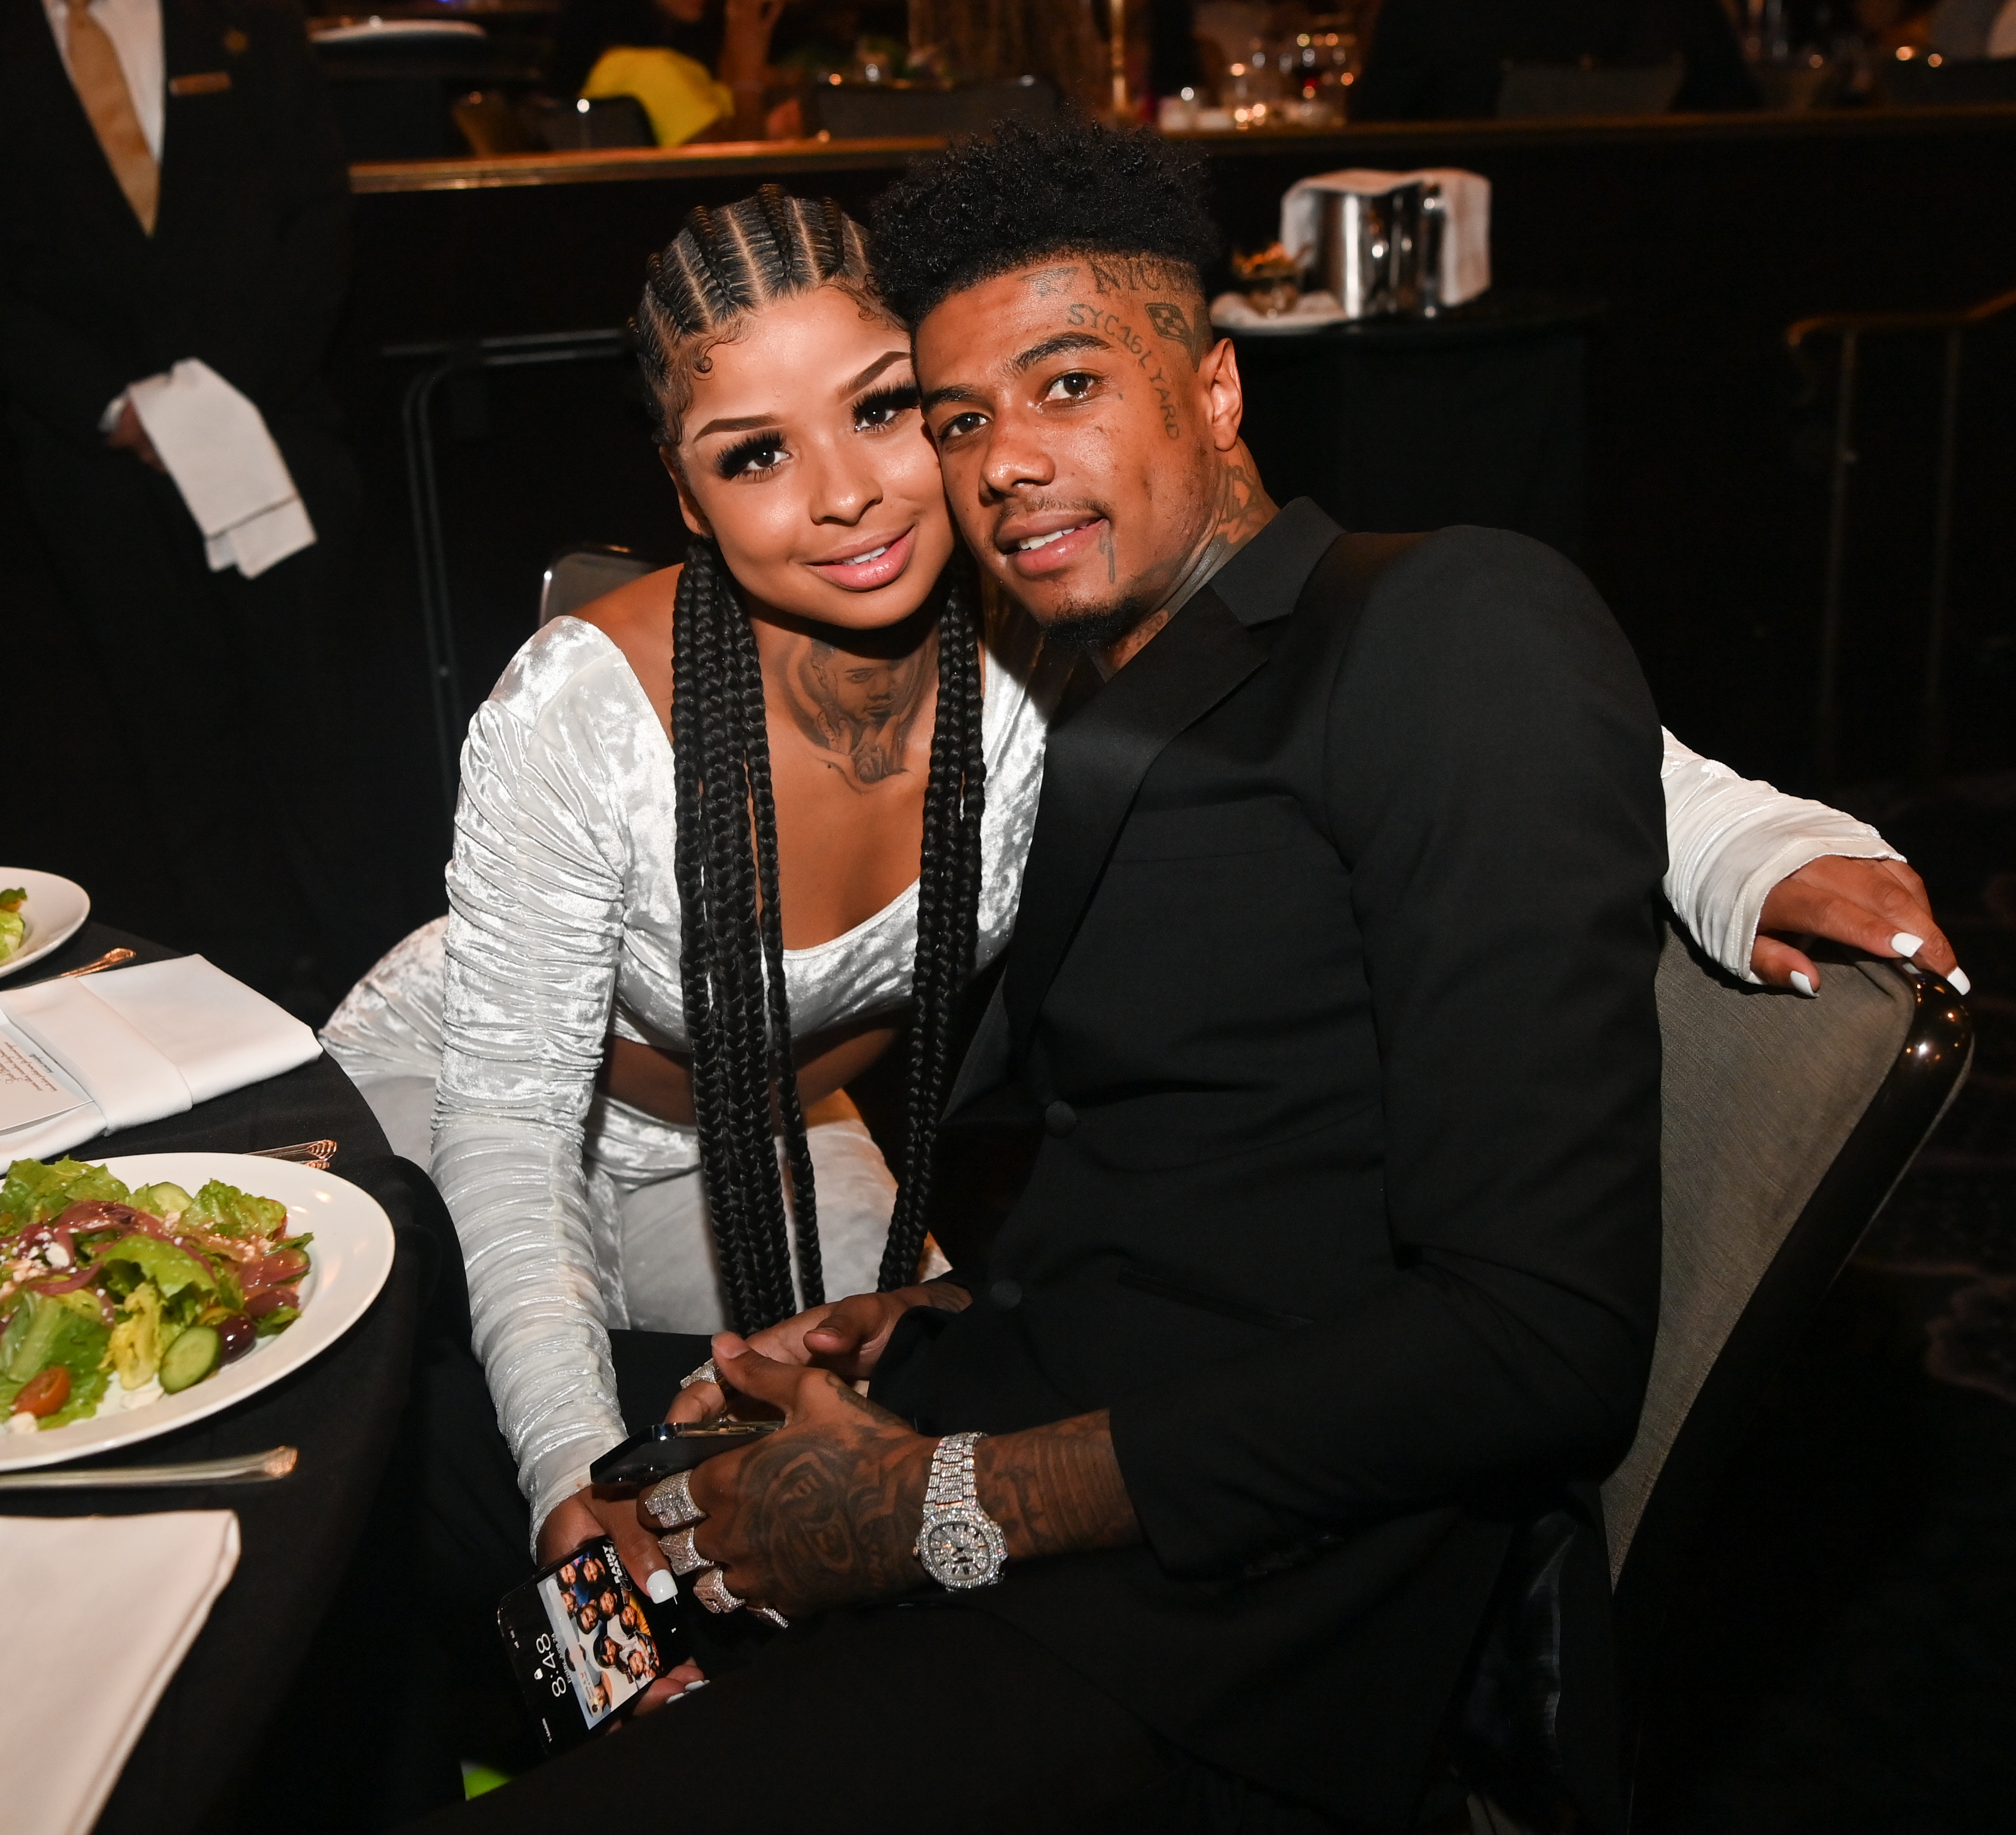 Blueface Disses Chrisean Rock’s Teeth In Hateful Twitter Rant, She Claps Back